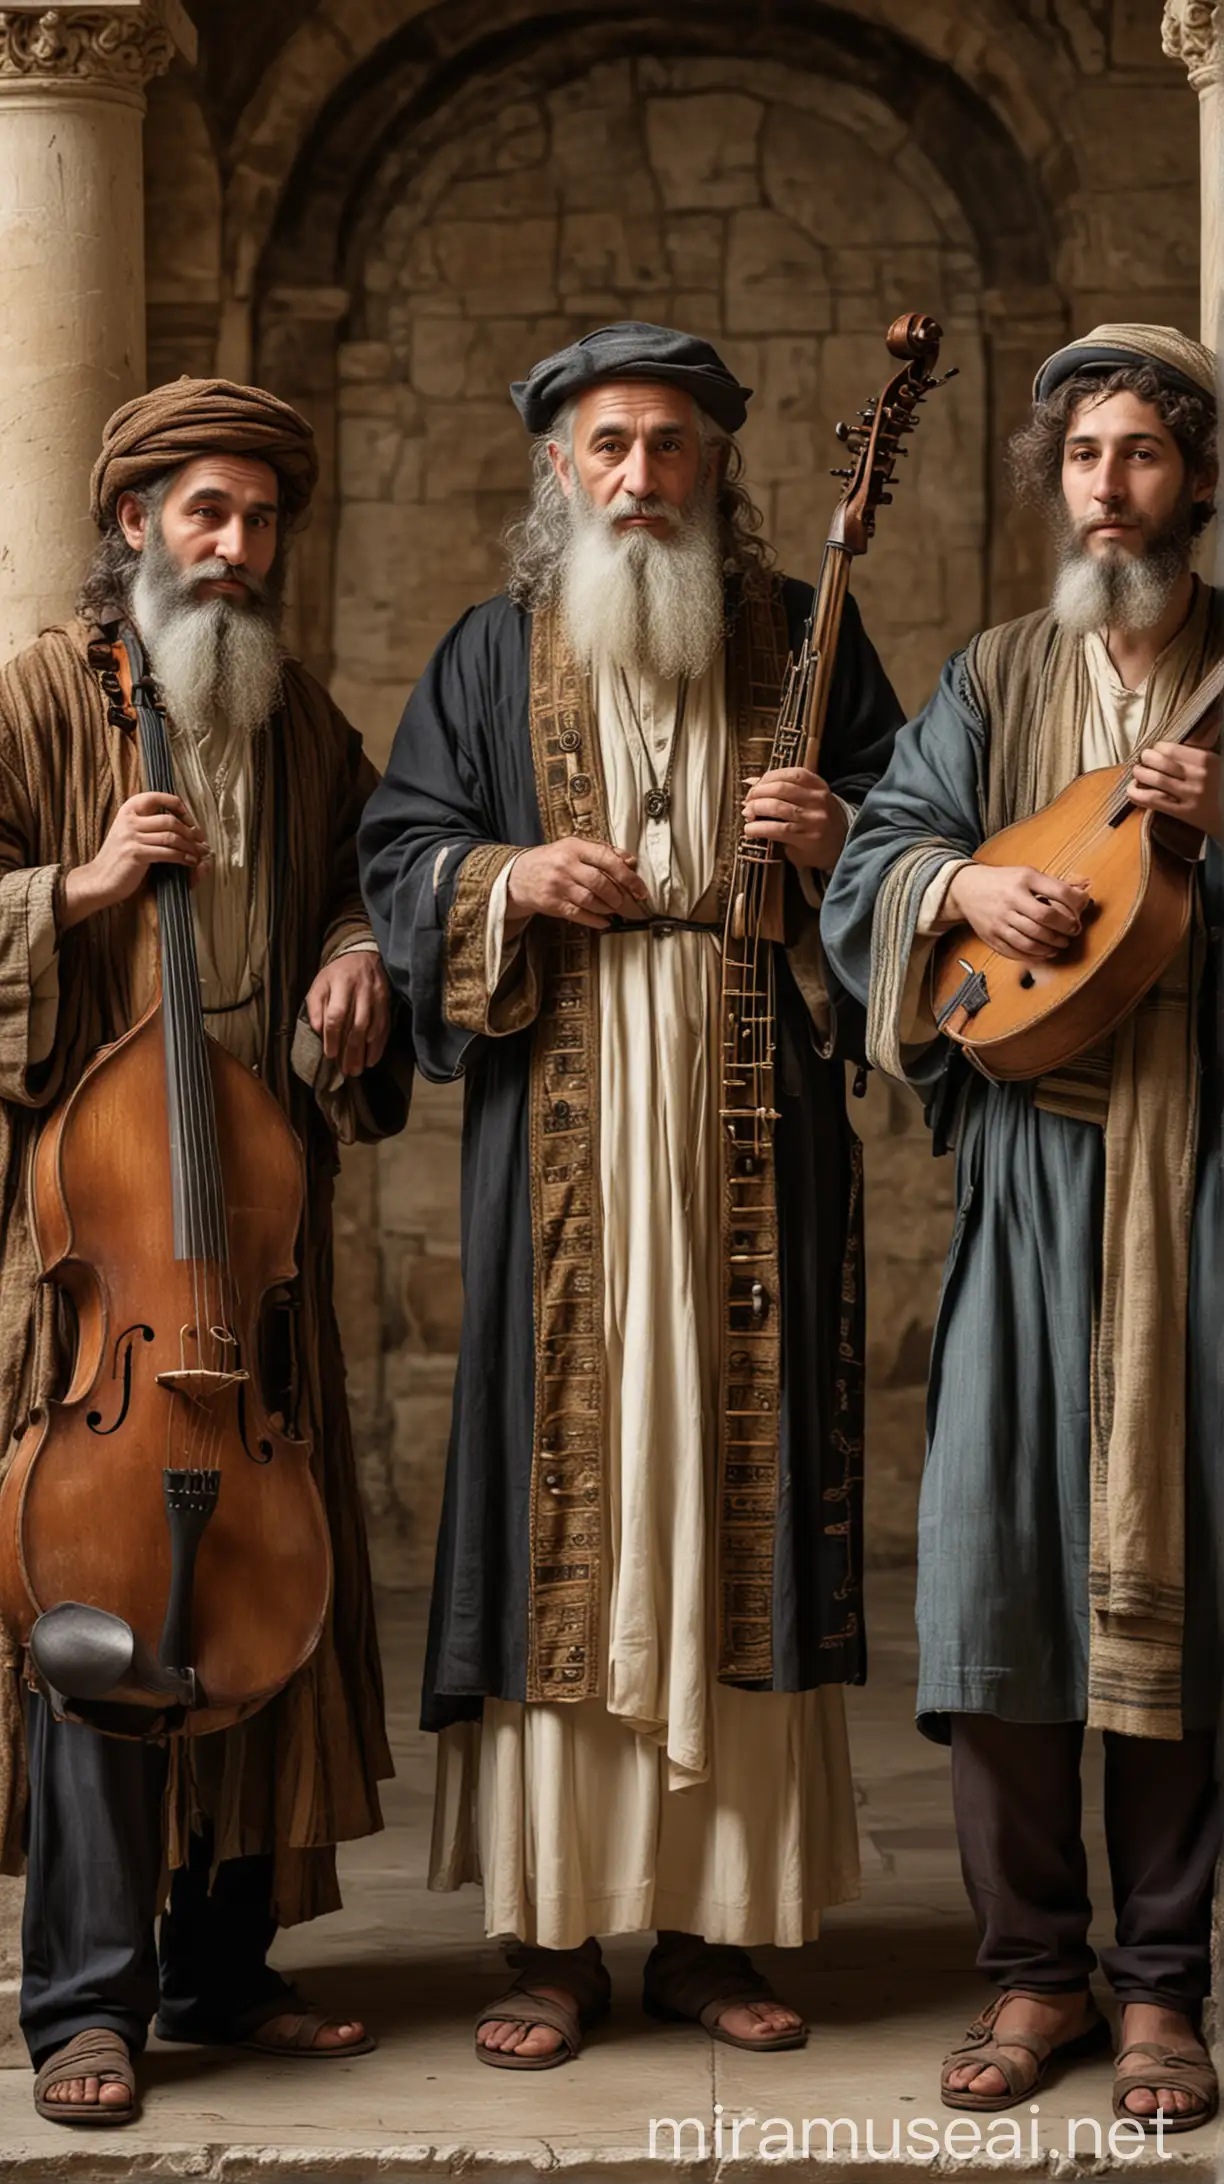 Three Jewish Musicians in Ancient World Performing Music